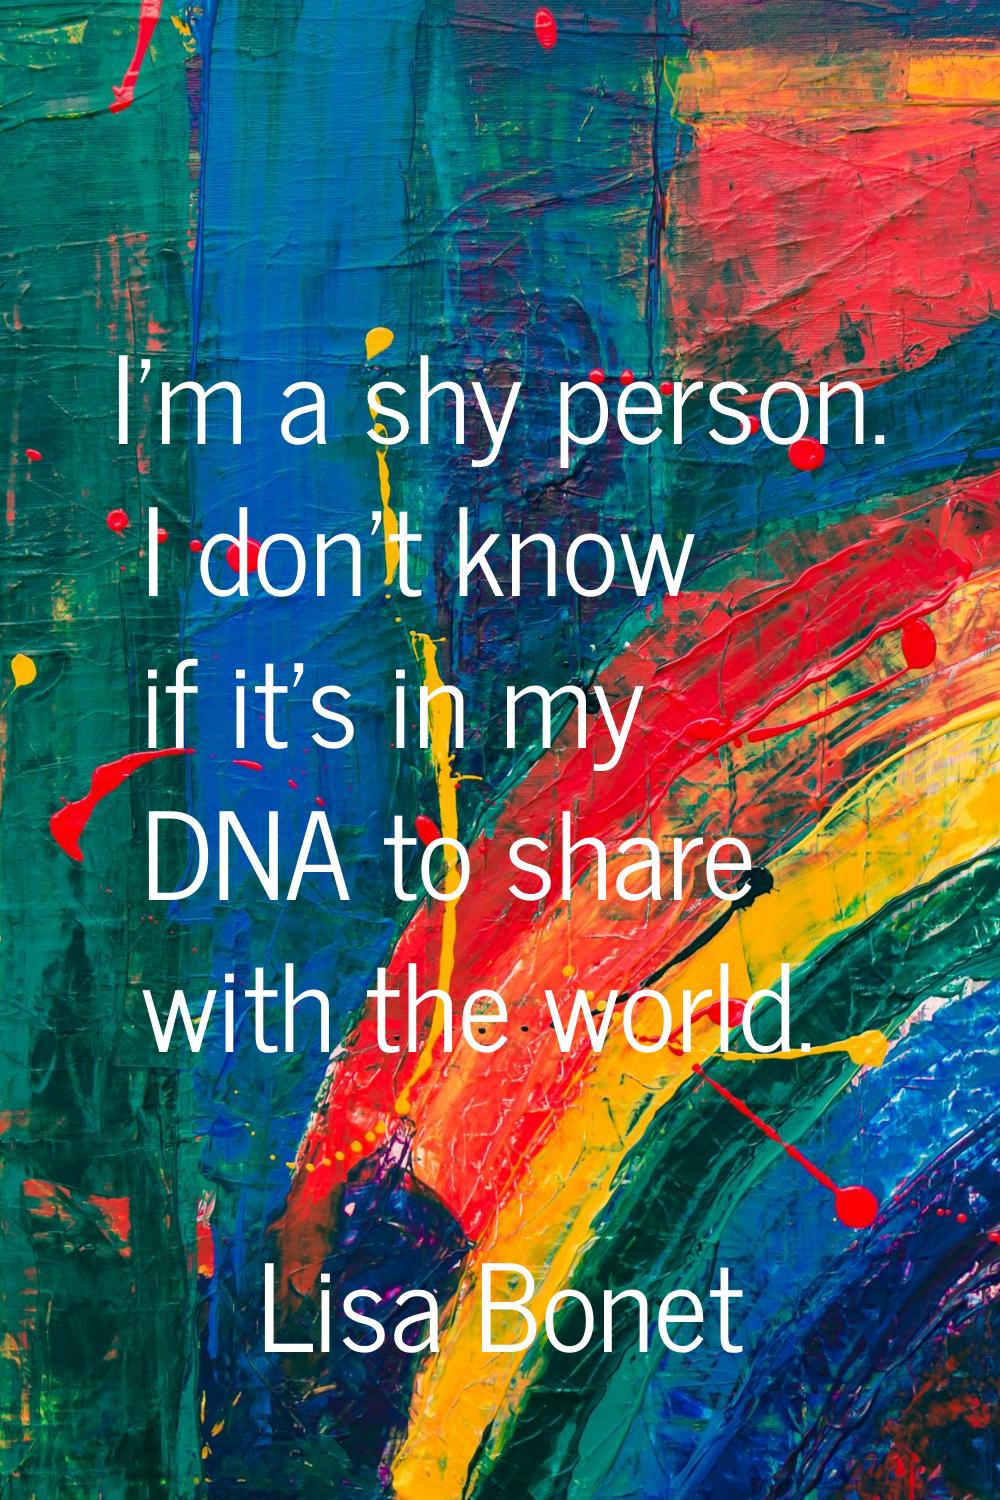 I'm a shy person. I don't know if it's in my DNA to share with the world.